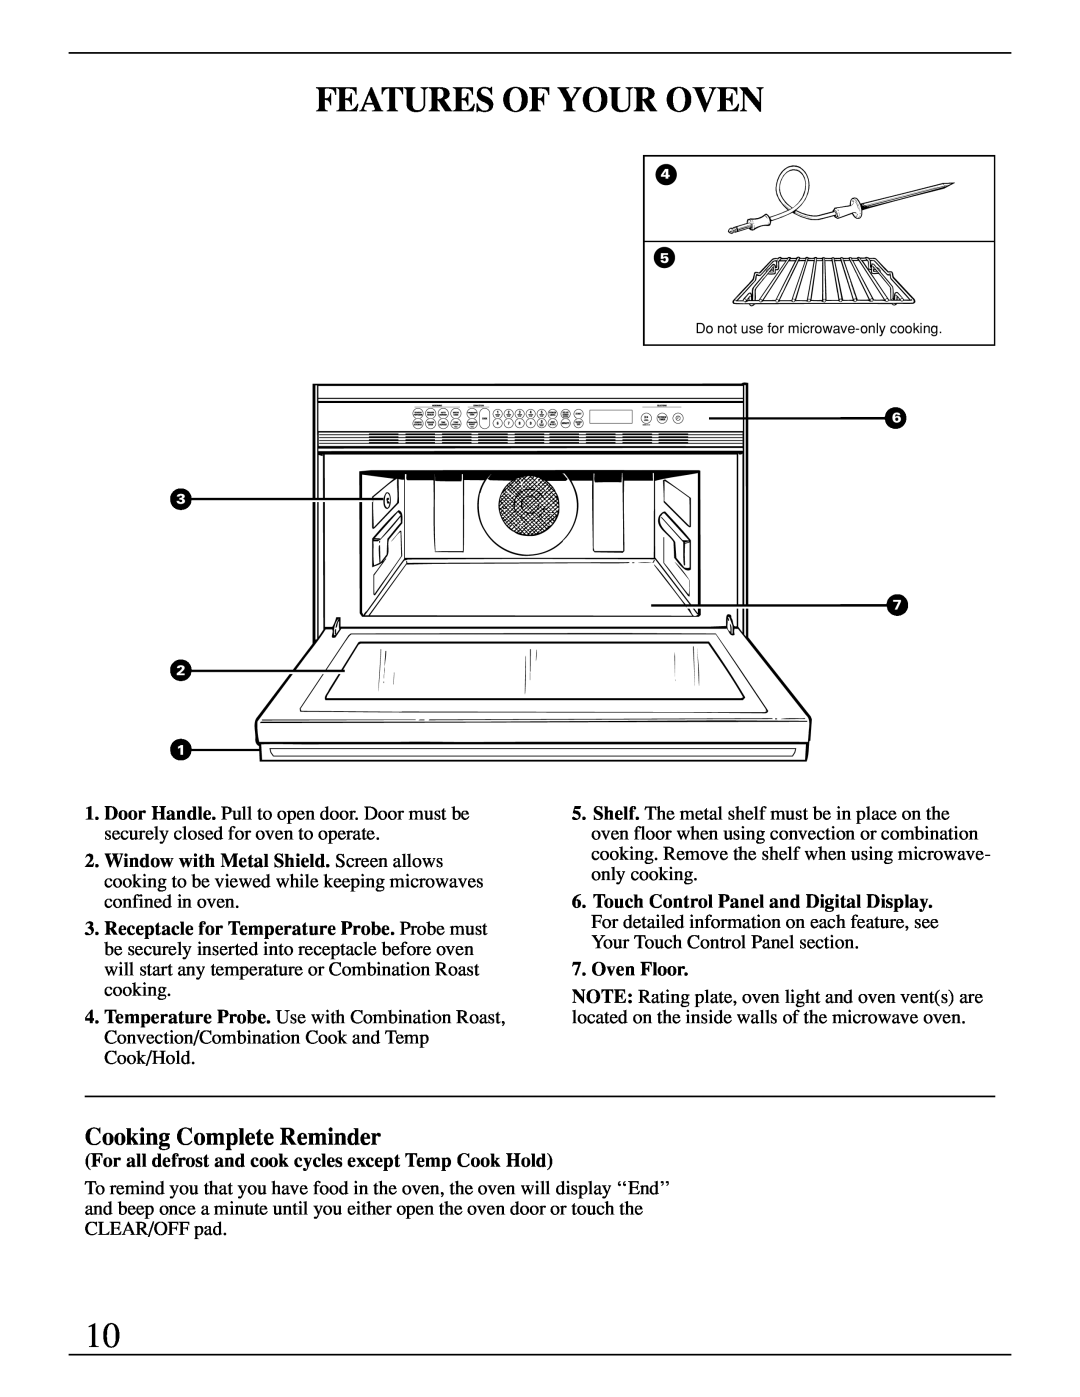 GE Monogram ZMC1095 owner manual Features Of Your Oven, Cooking Complete Reminder 